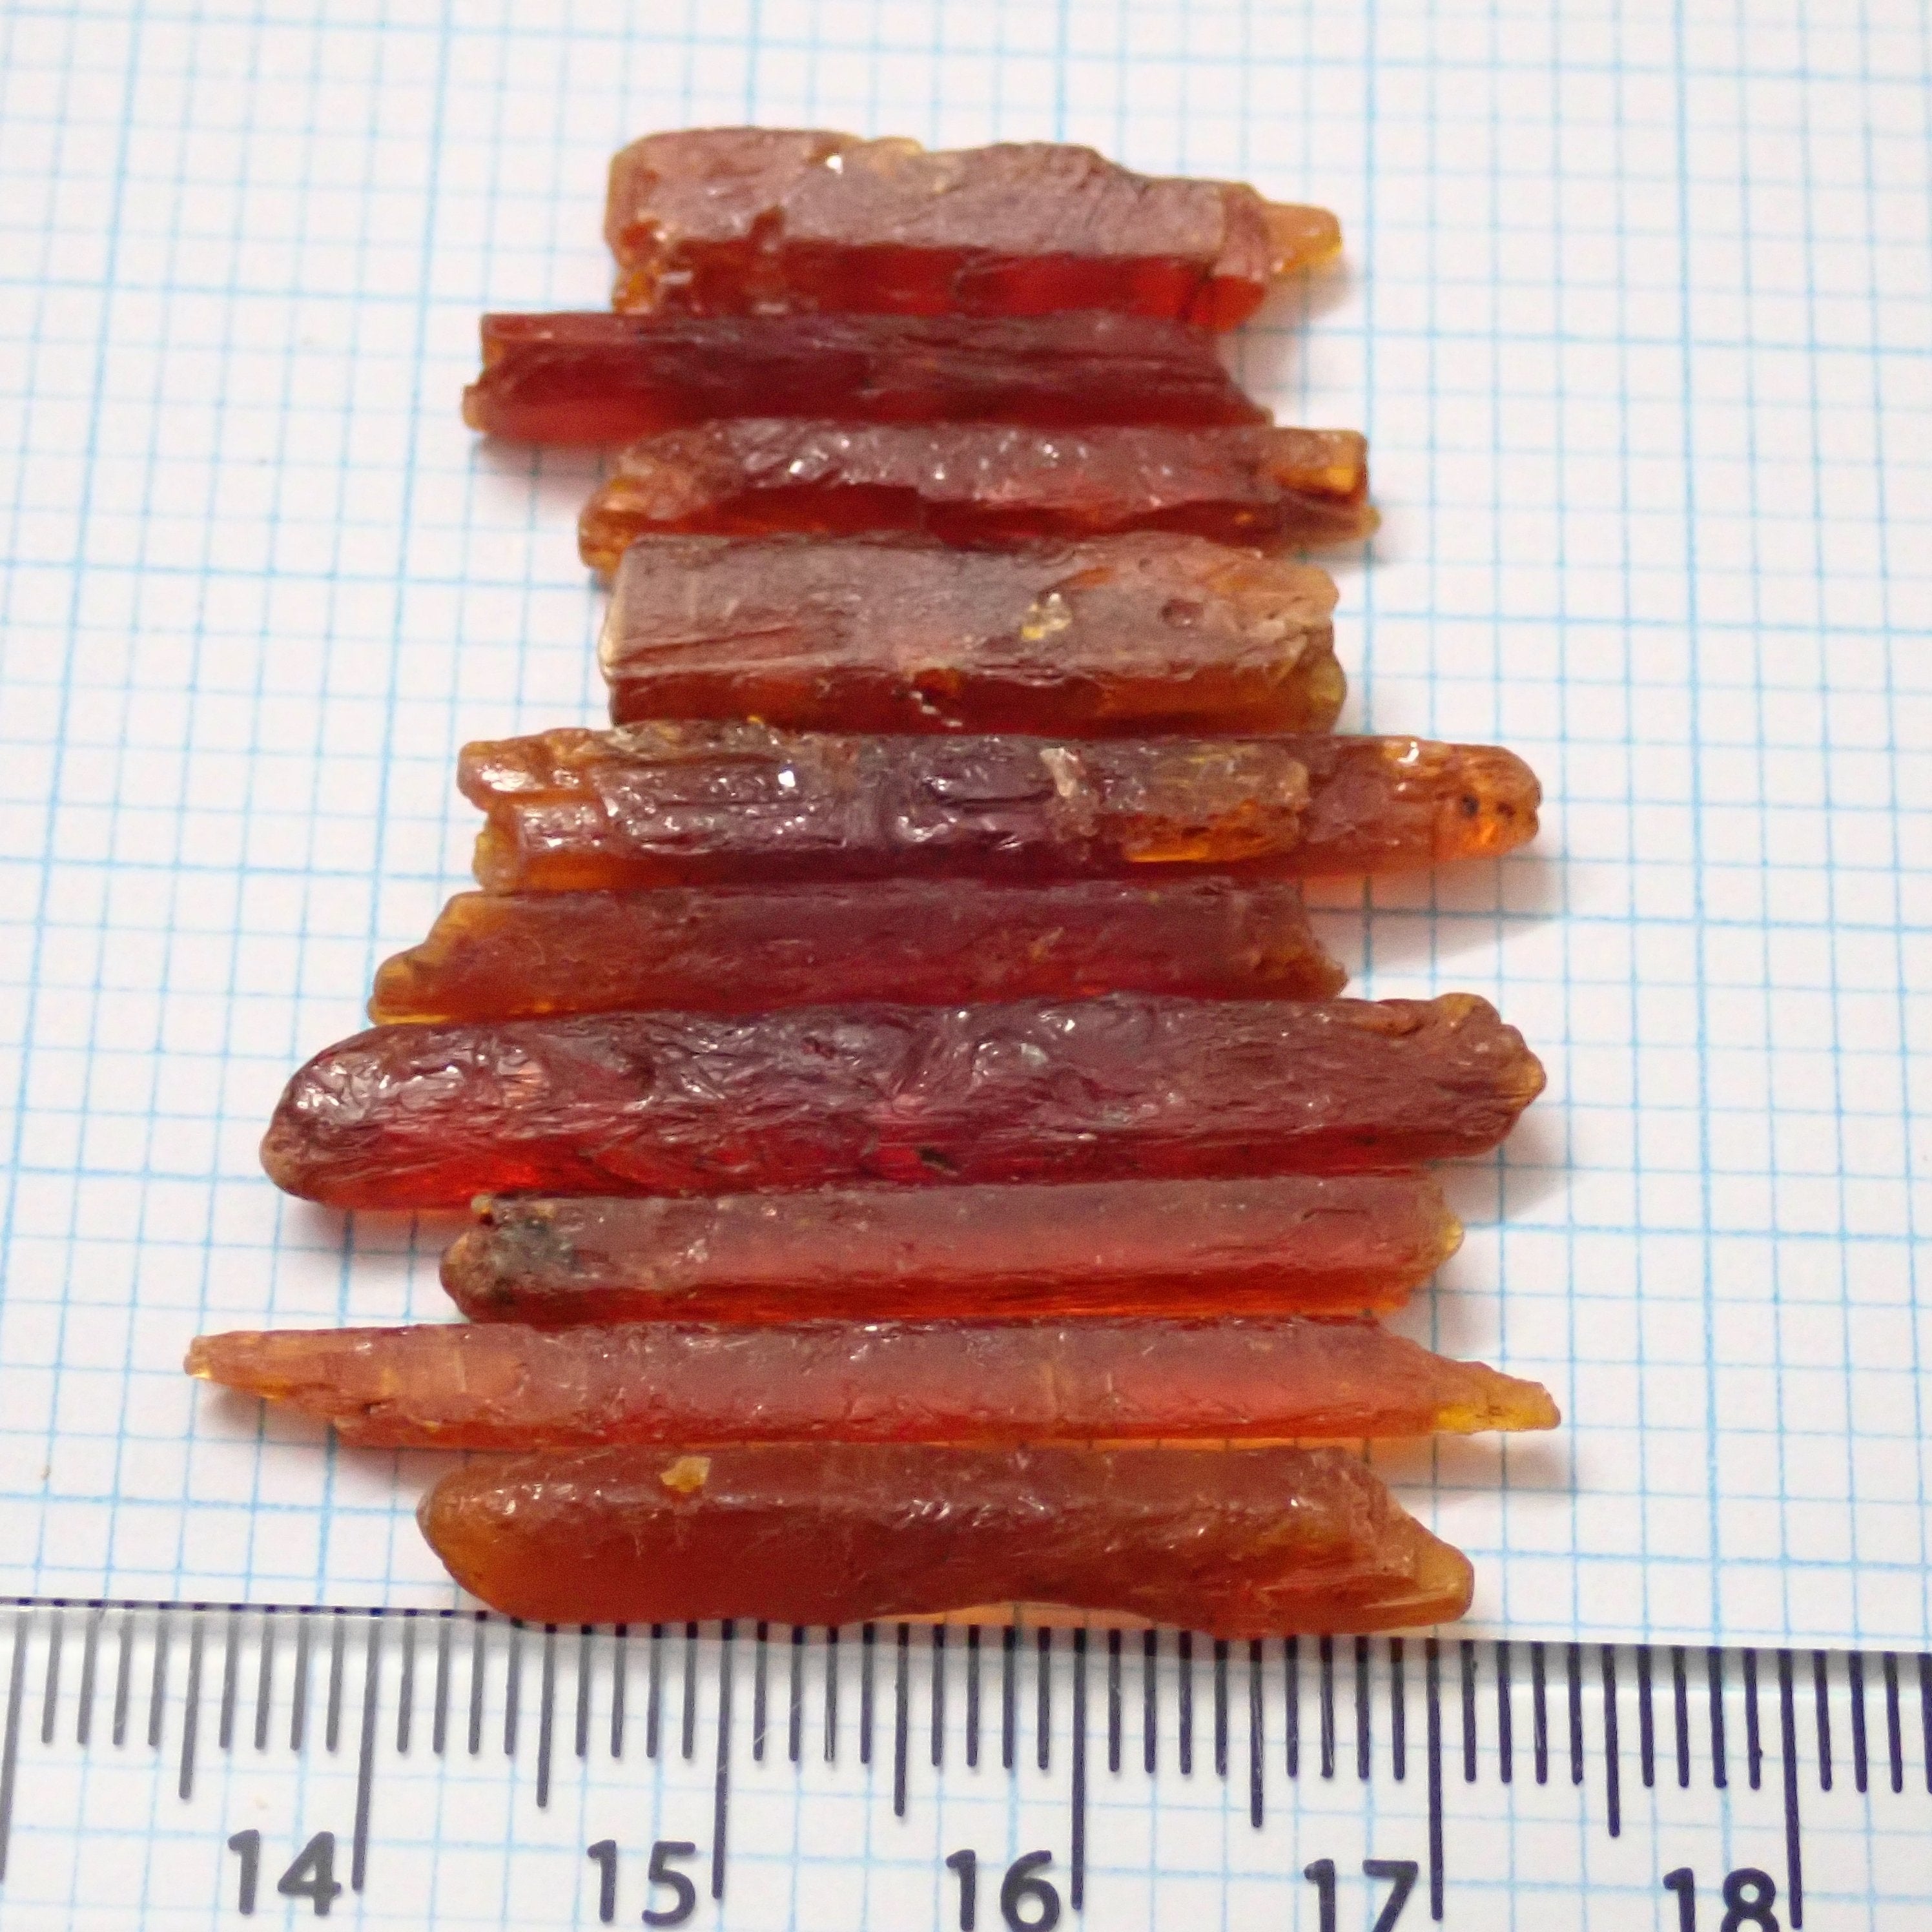 Orange Kyanite Tanzania. 3.5Ct-10Ct Pieces @$6 Per Piece Sold In Lots Of 10 So $60 On Blind Pour